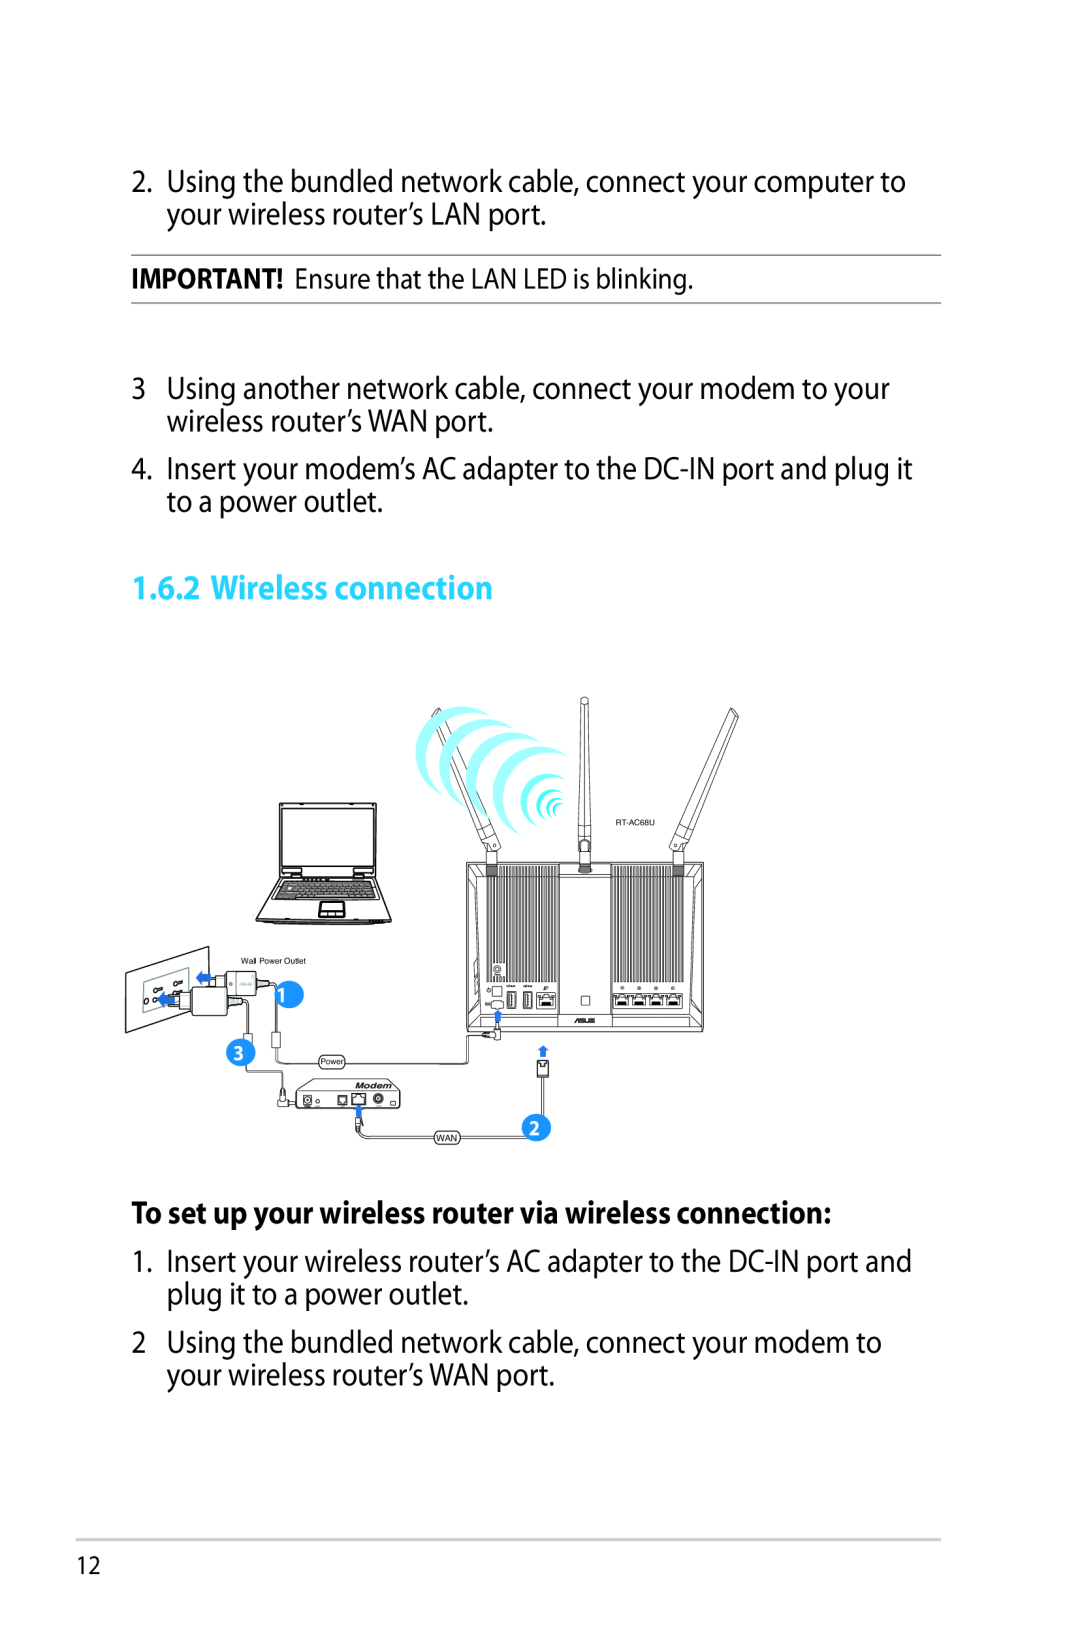 Asus RTAC68U manual Wireless connection, To set up your wireless router via wireless connection 